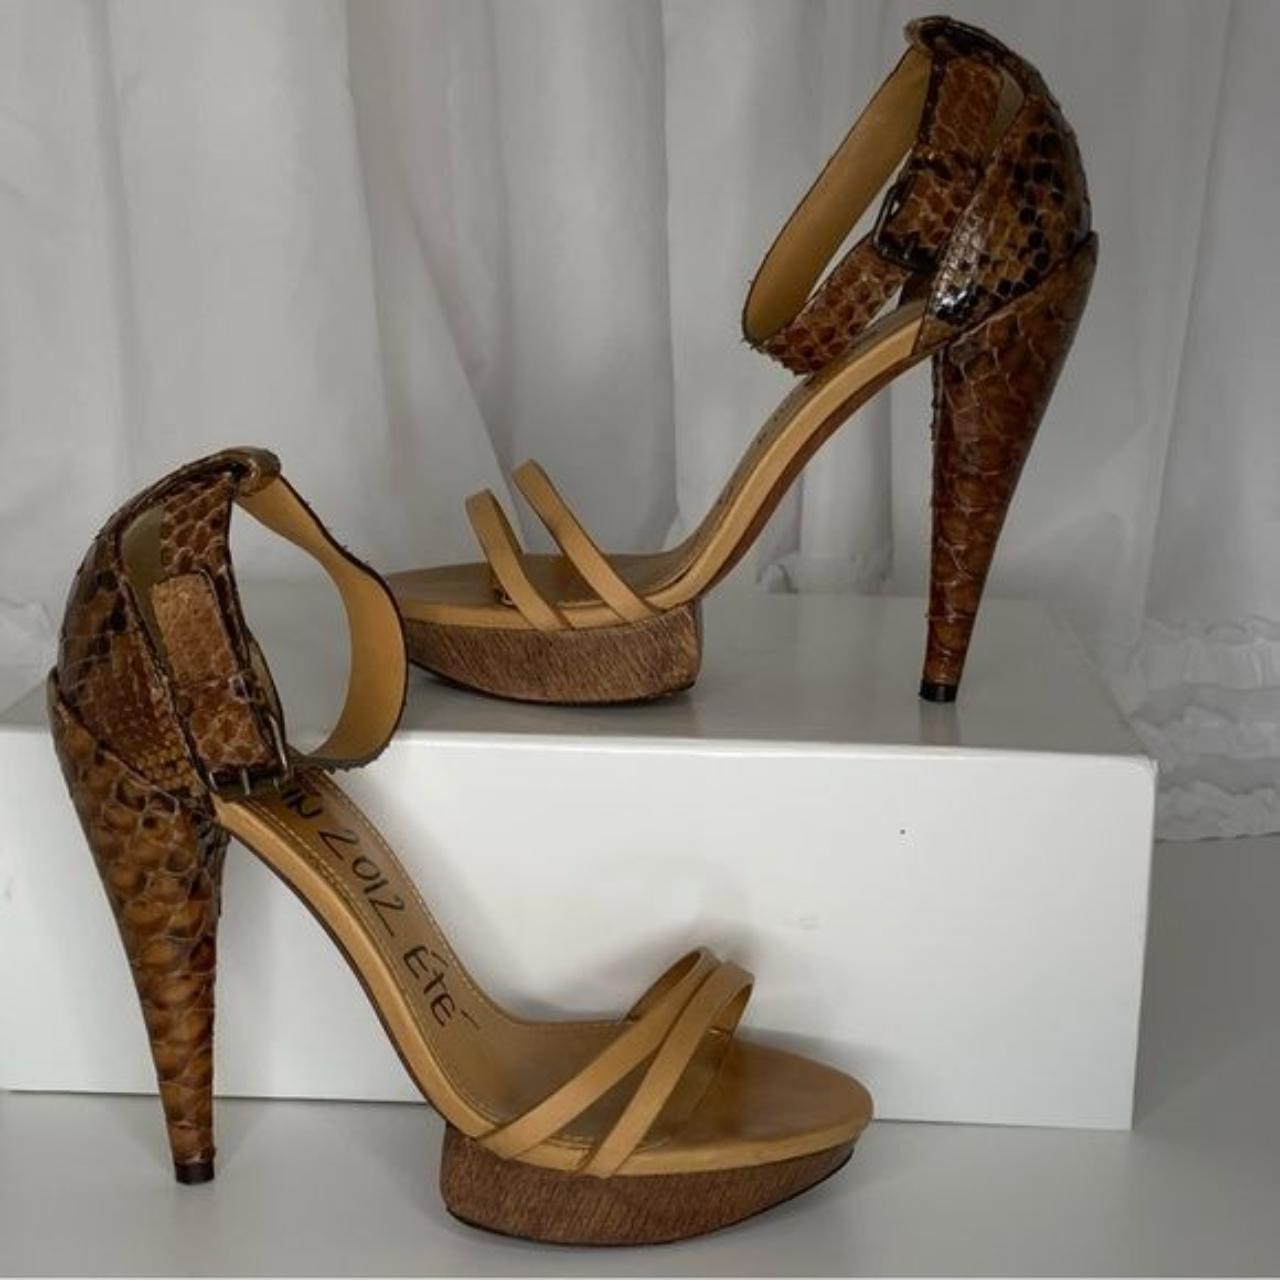 Lanvin Women's Tan and Brown Sandals (2)